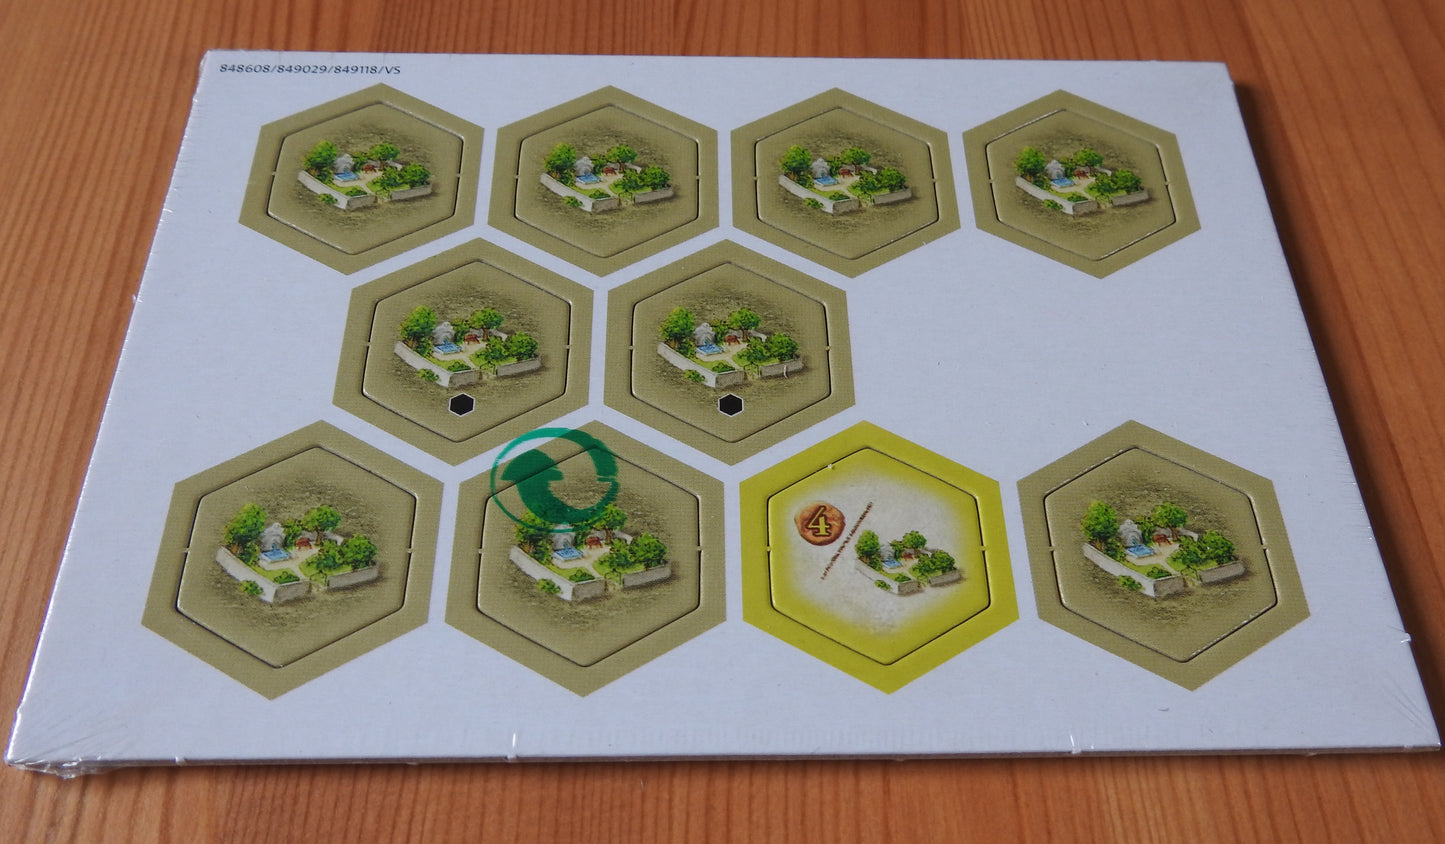 Another view at an angle showing all 10 Pleasure Garden hexes.